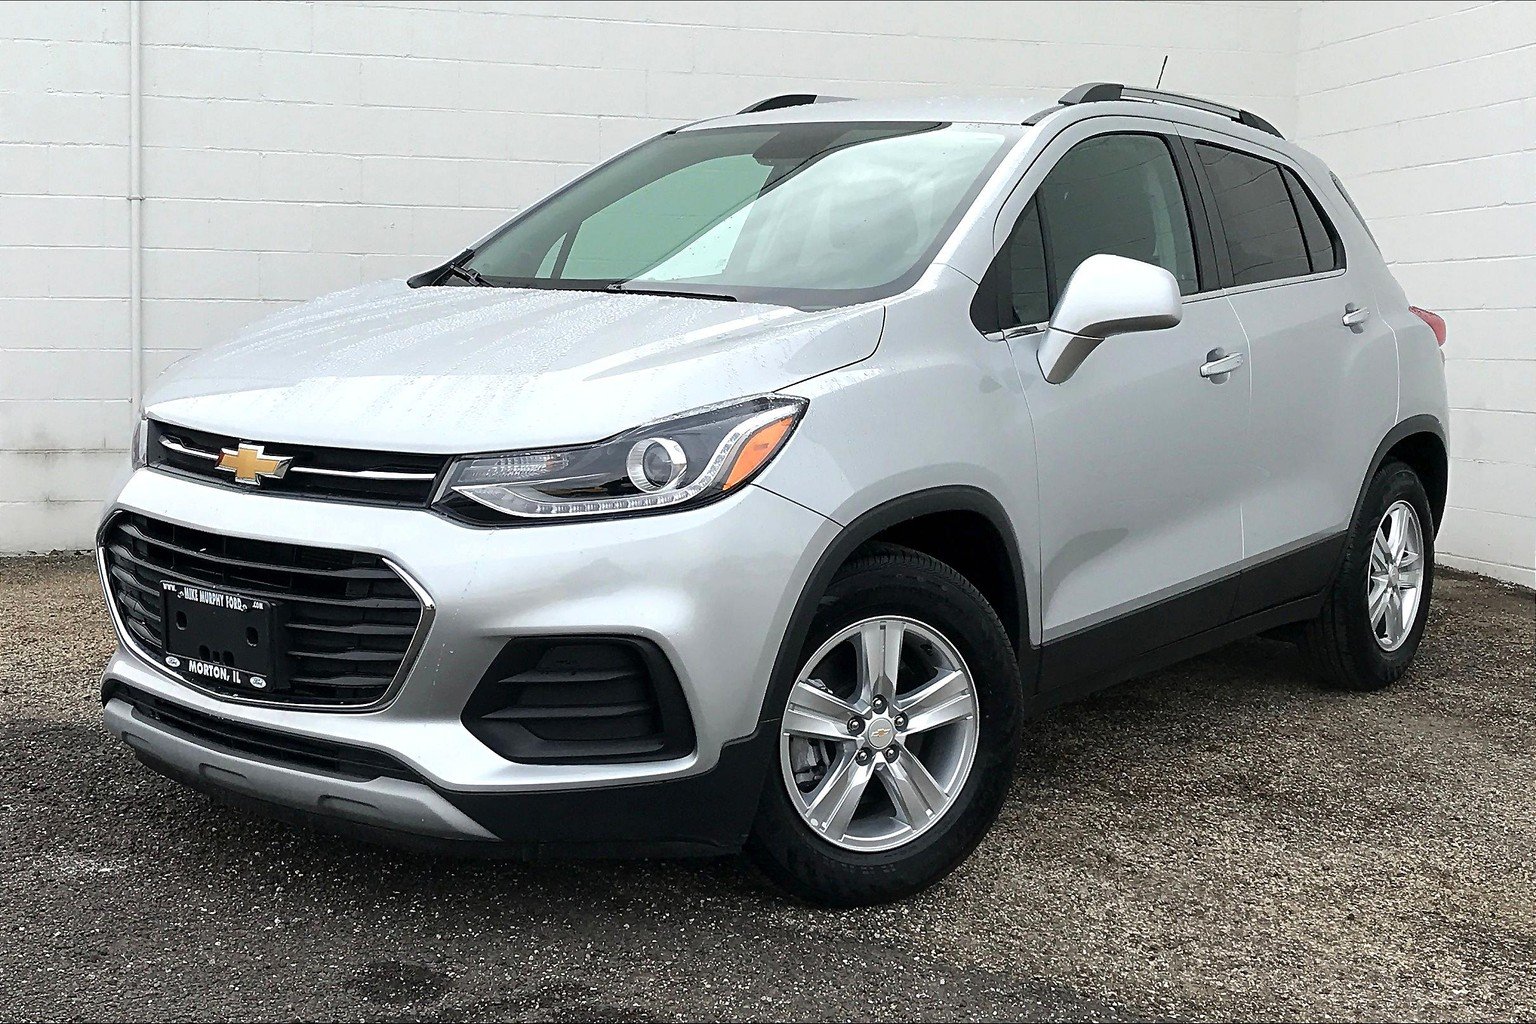 Pre-Owned 2018 Chevrolet Trax FWD 4dr LT 4D Sport Utility in Morton ...